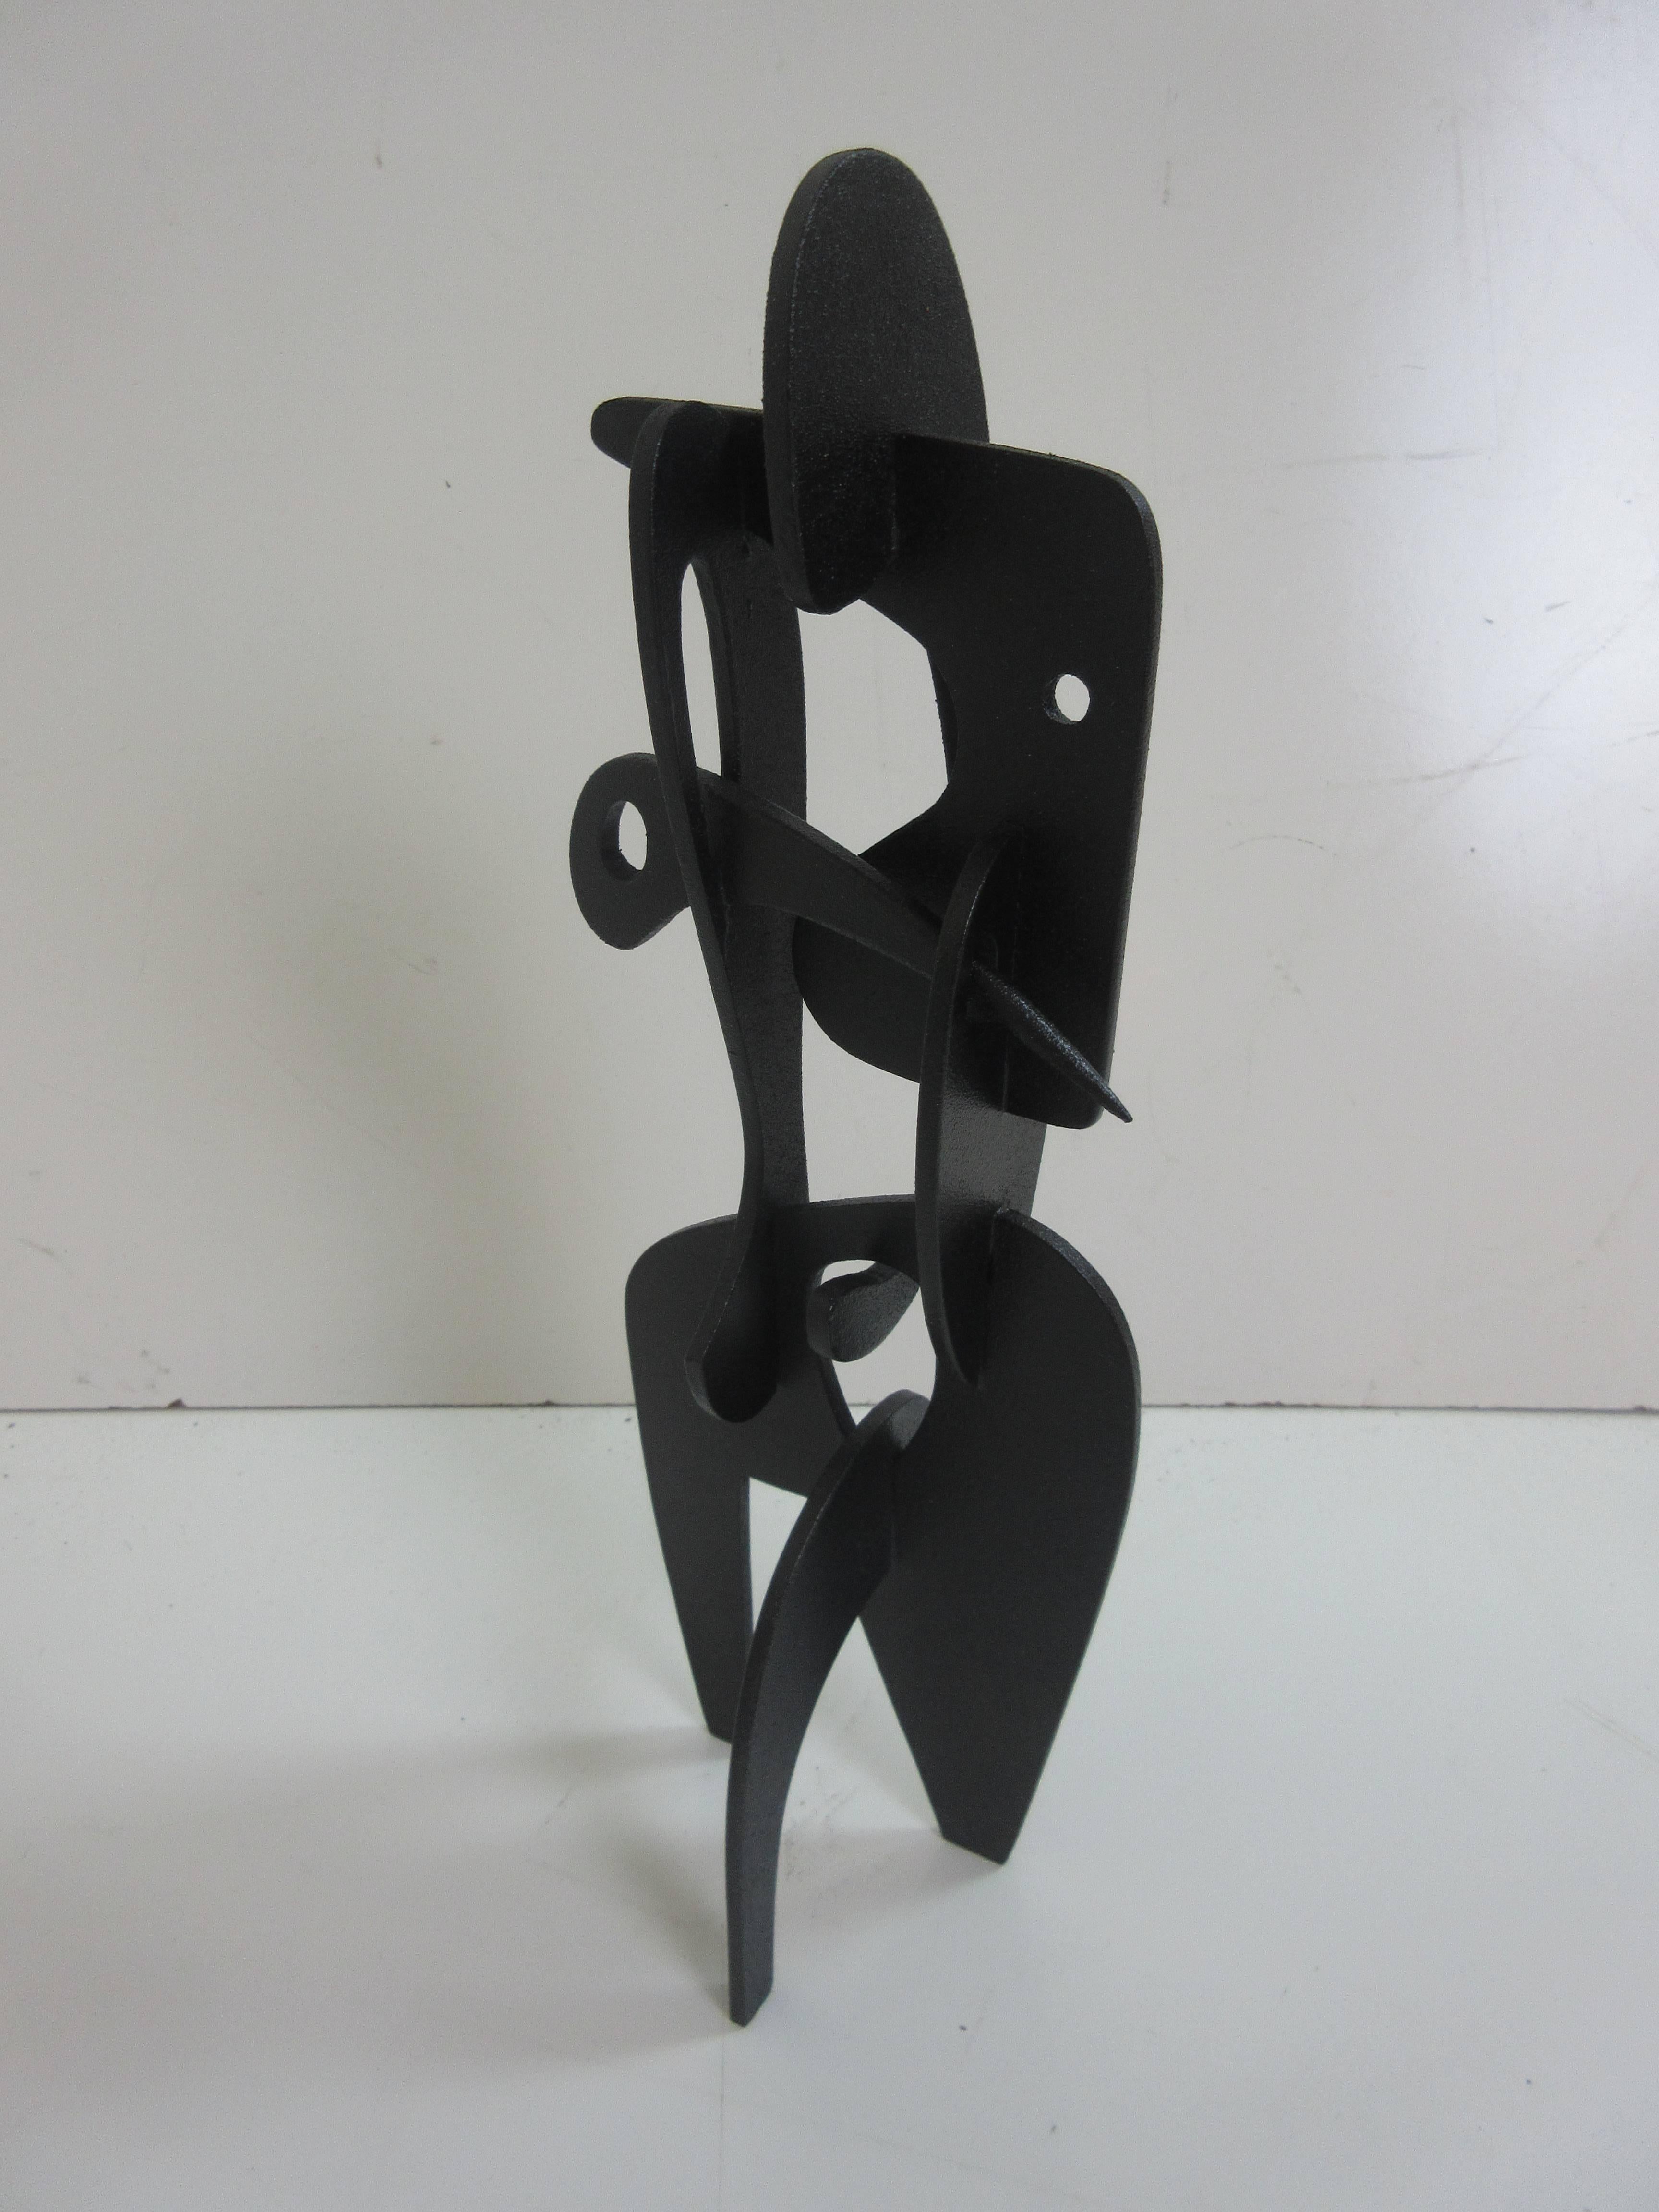 Adam Henderson sculpture female #5 of ebonized wood. All wood sculpture of shaped and drilled flat planes of wood fitted together evoking the female form in an abstracted manner.